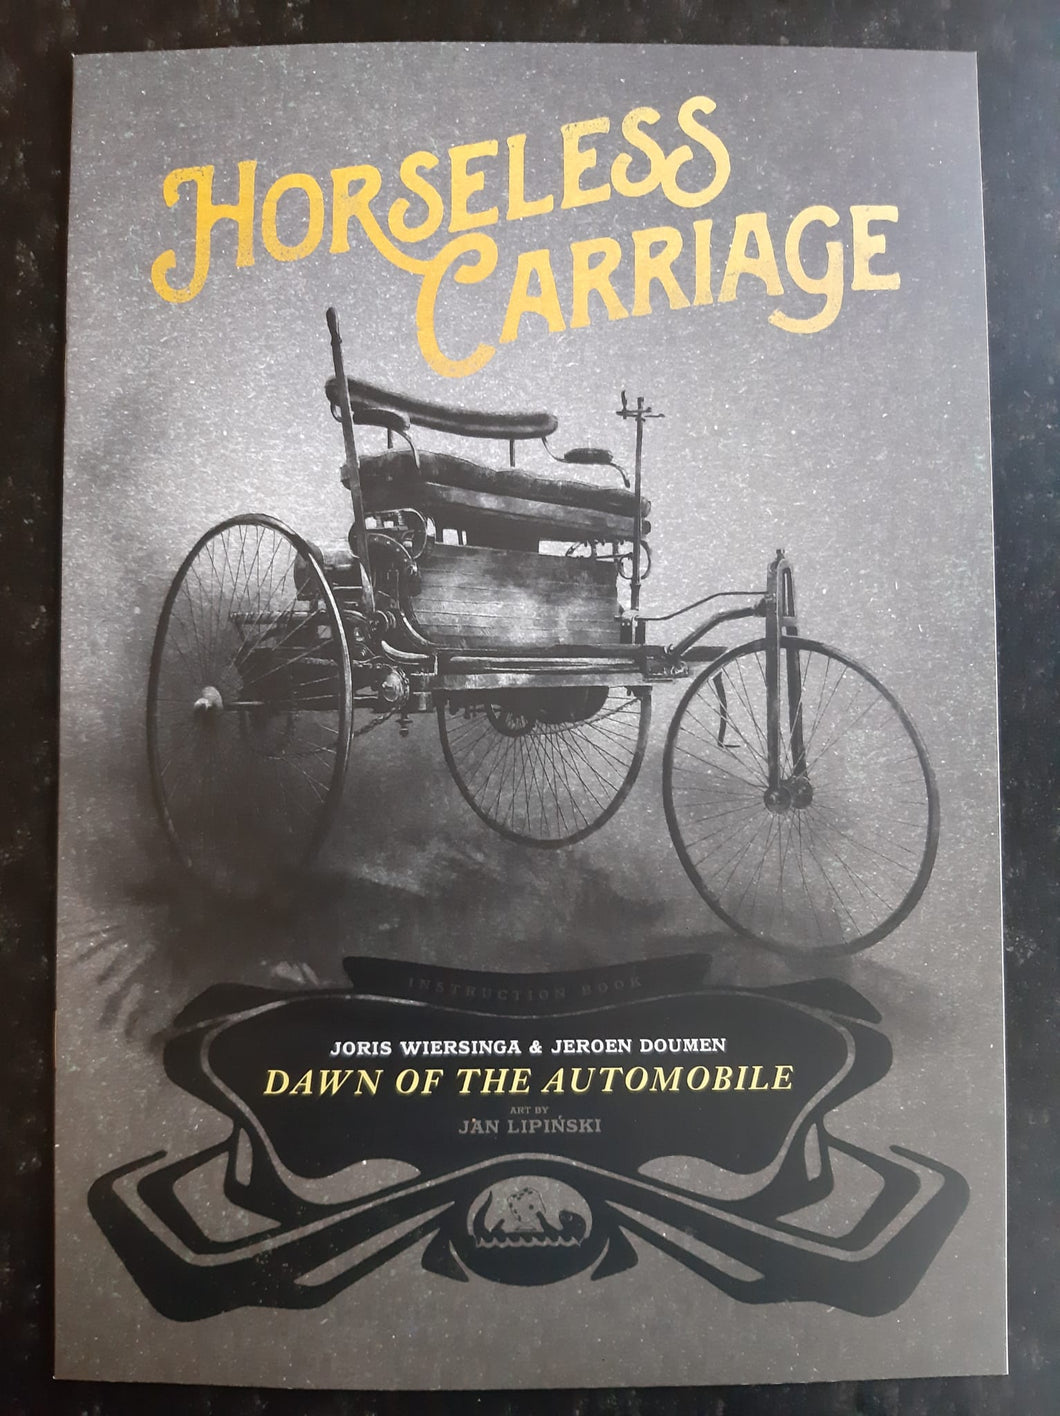 Horseless Carriage 2nd edition rule book